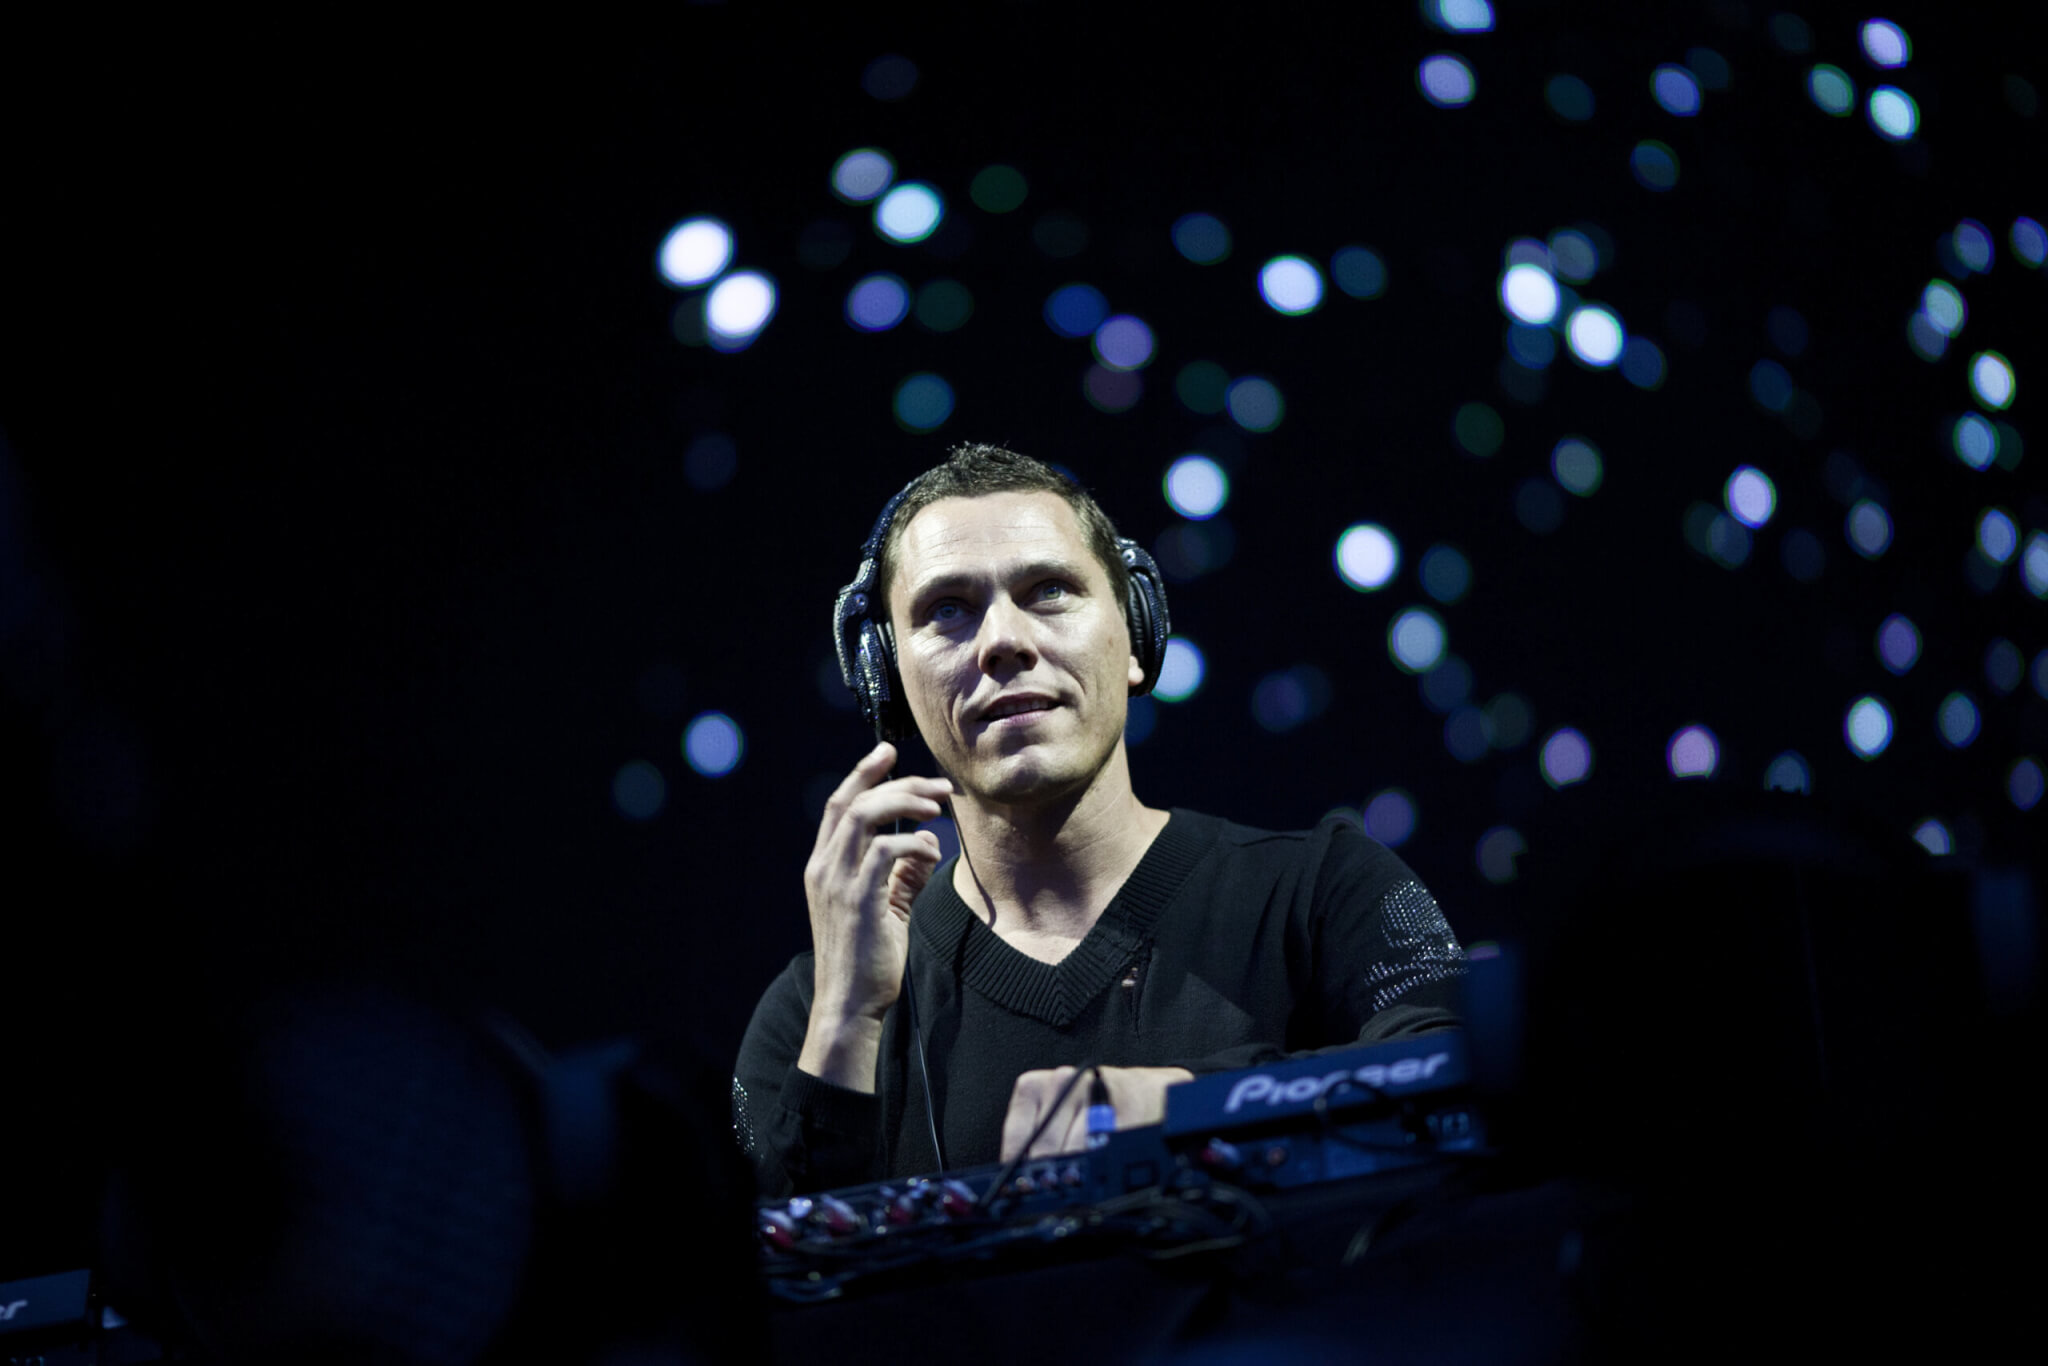 Tiësto performs a live DJ set at the Way Out West festival on August 13, 2011 in Gothenburg, Sweden.